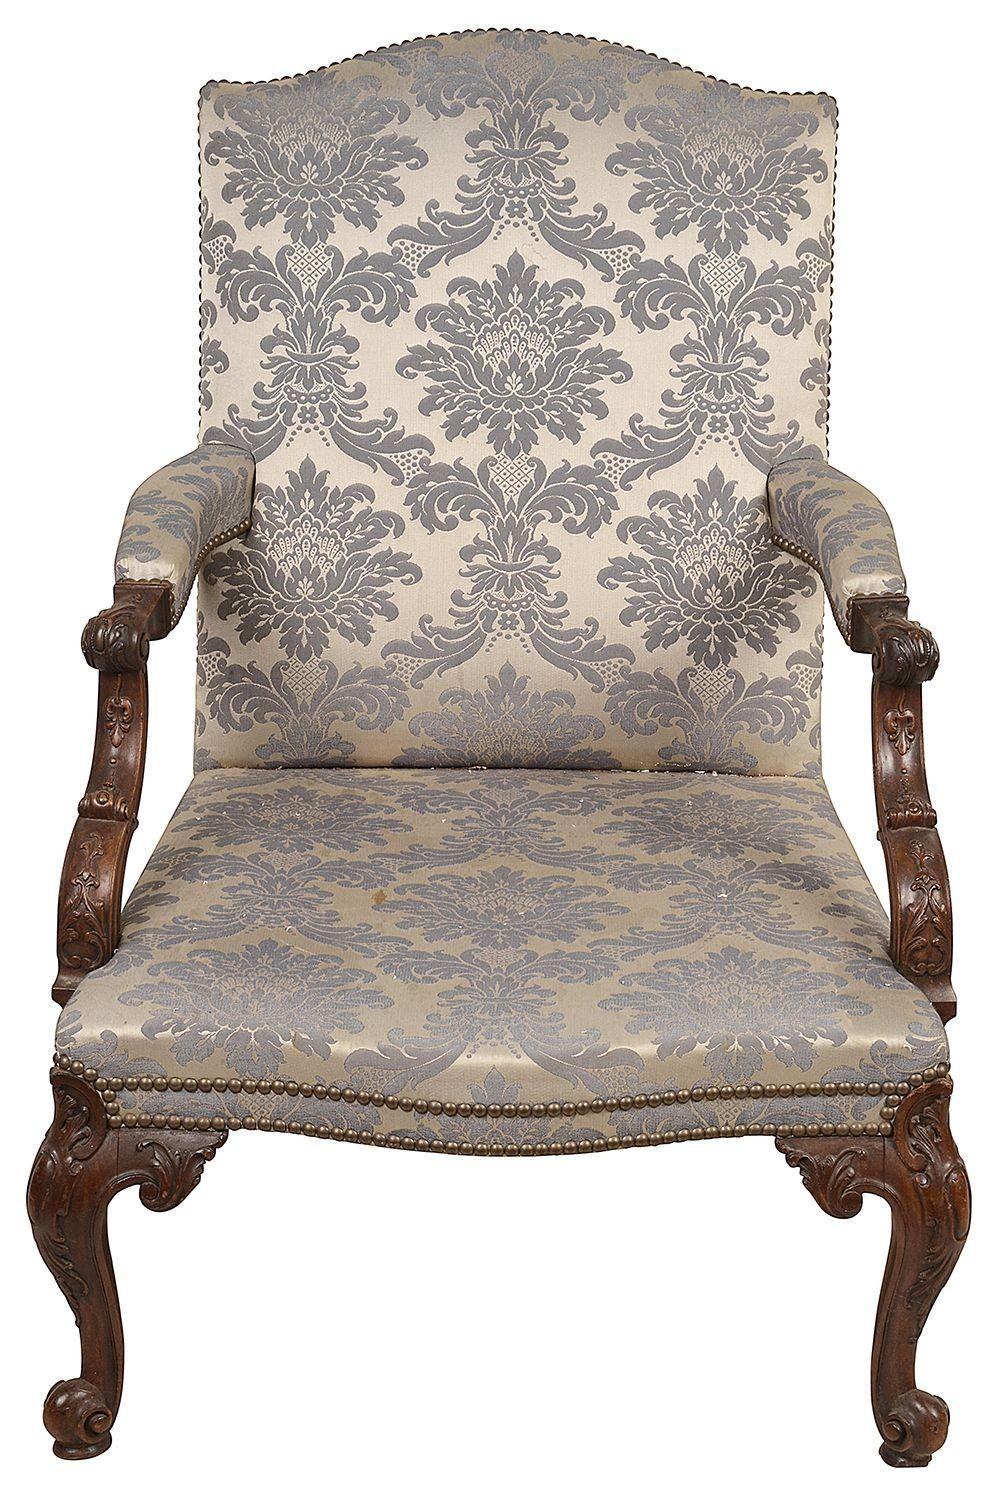 A very good quality 19th Century George 11 style Mahogany Gainsborough arm chair, having a saddle upholstered back, carved scrolling show wood to the arms, raised on wonderfully hand carved cabriole legs front and back.
Batch 67 61312 DNCKZ